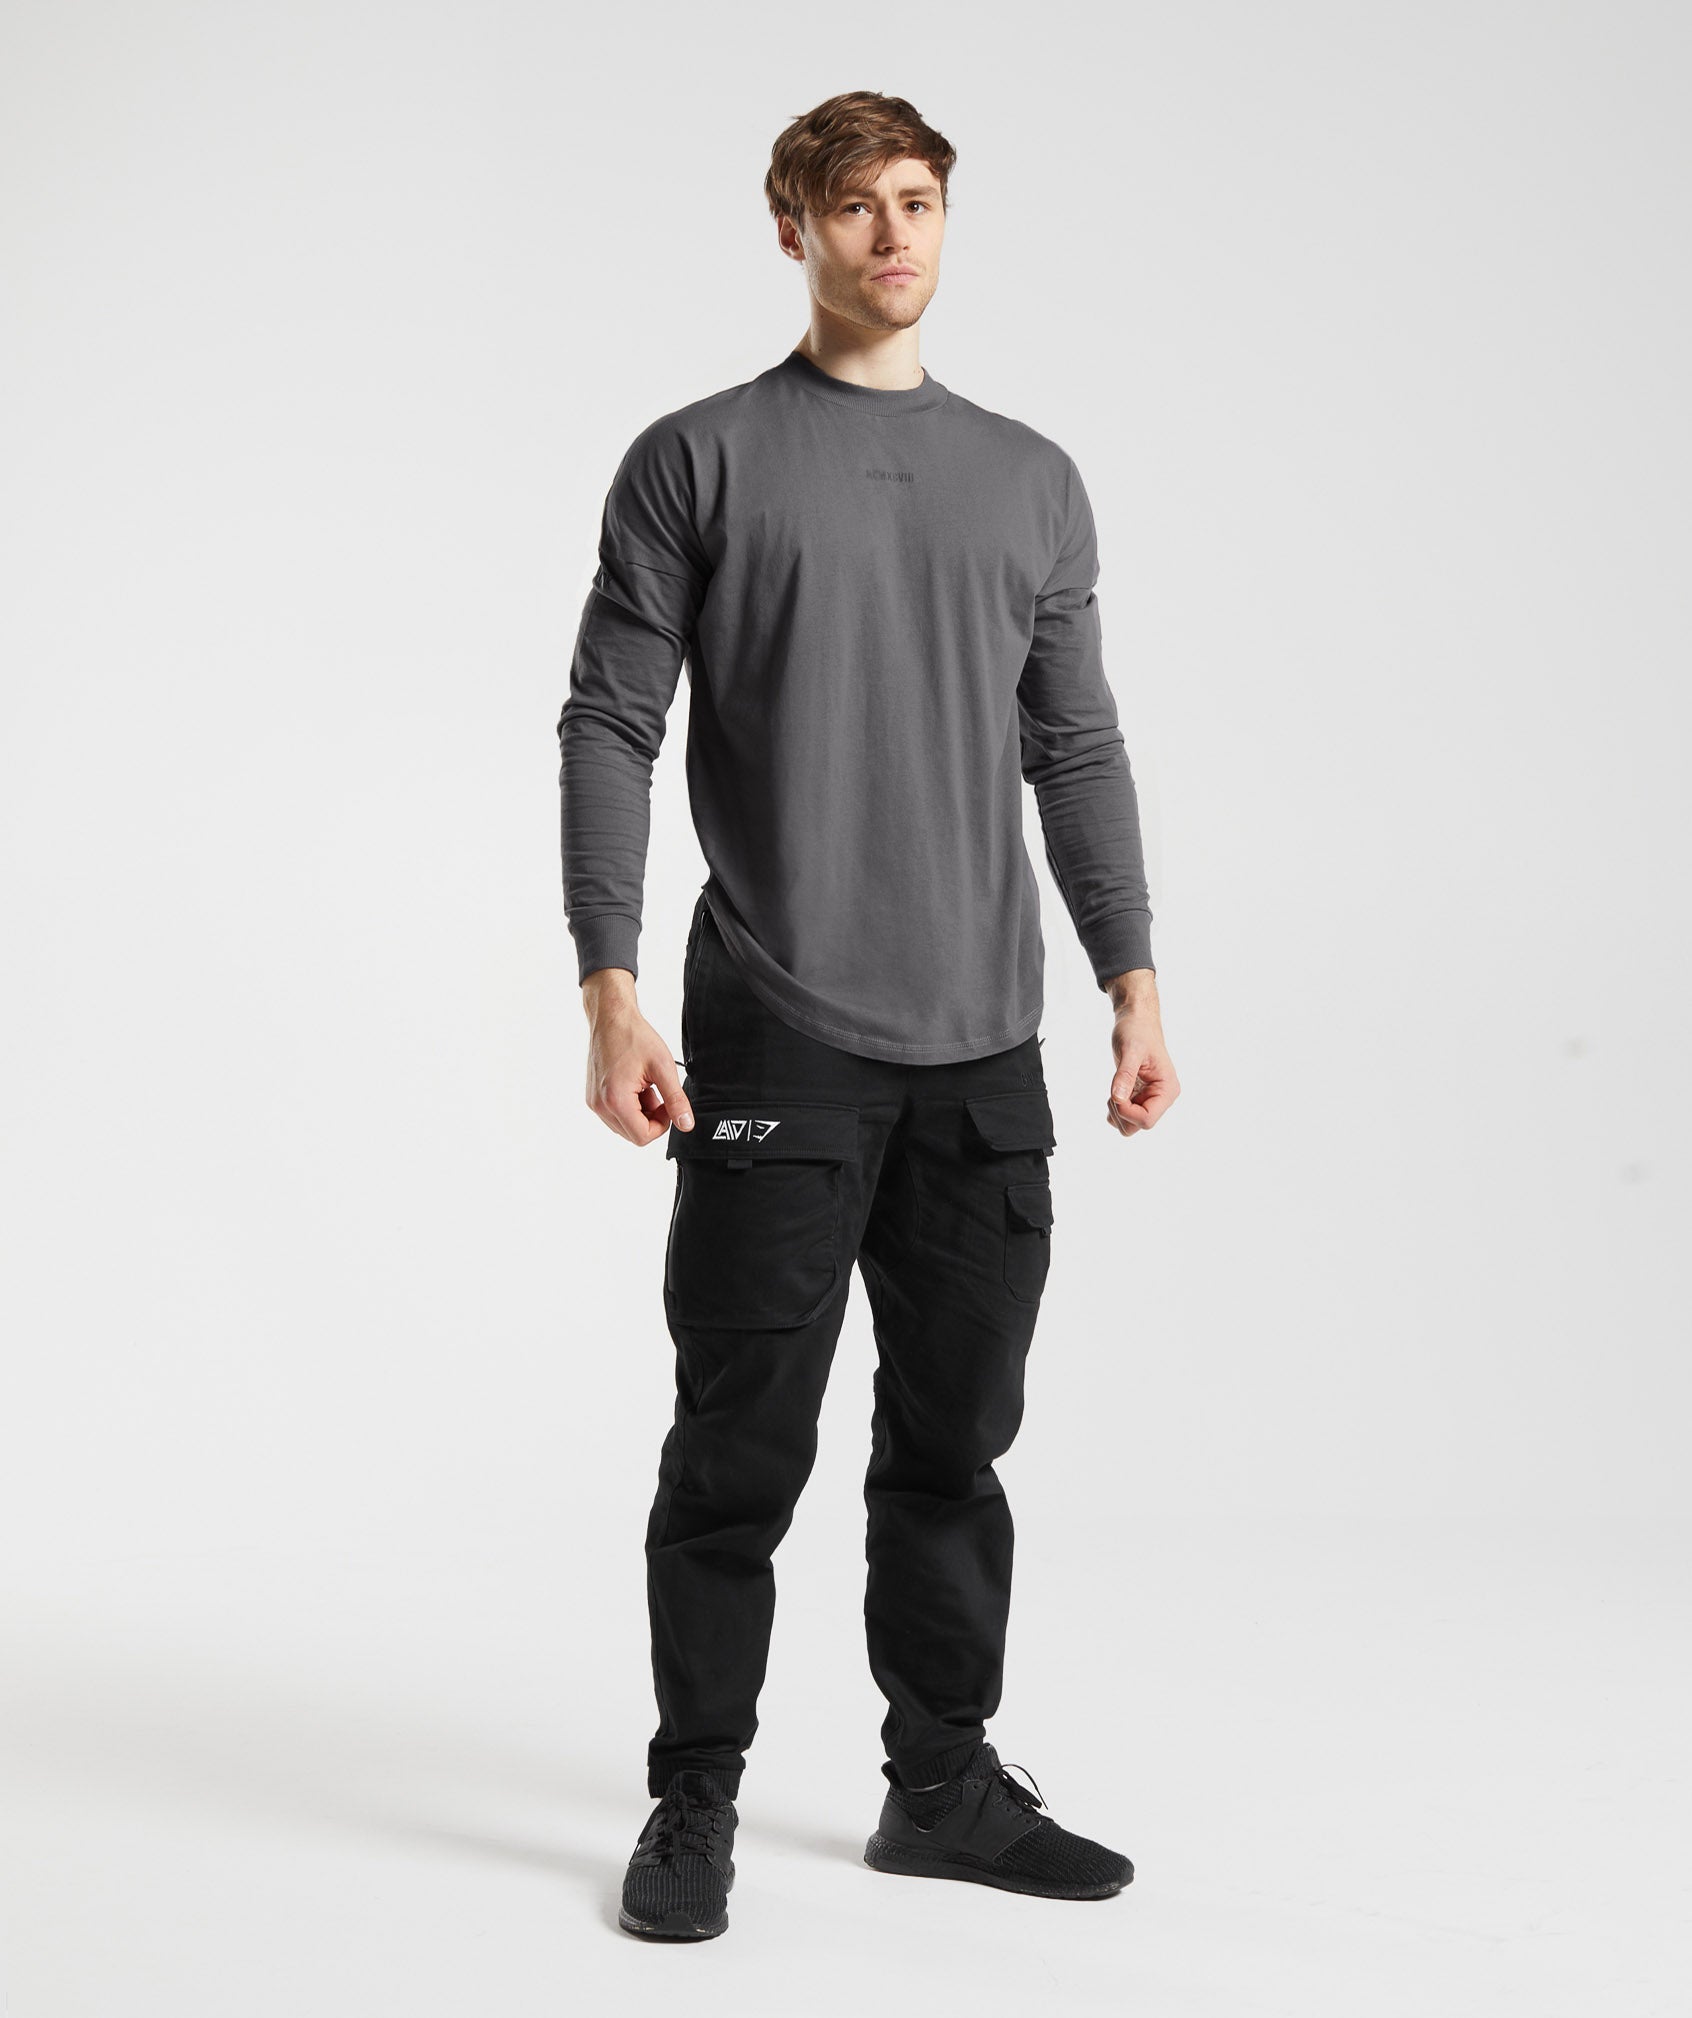 Gymshark - Cargo Bottoms - Wolf Grey - Size S - BRAND NEW IN